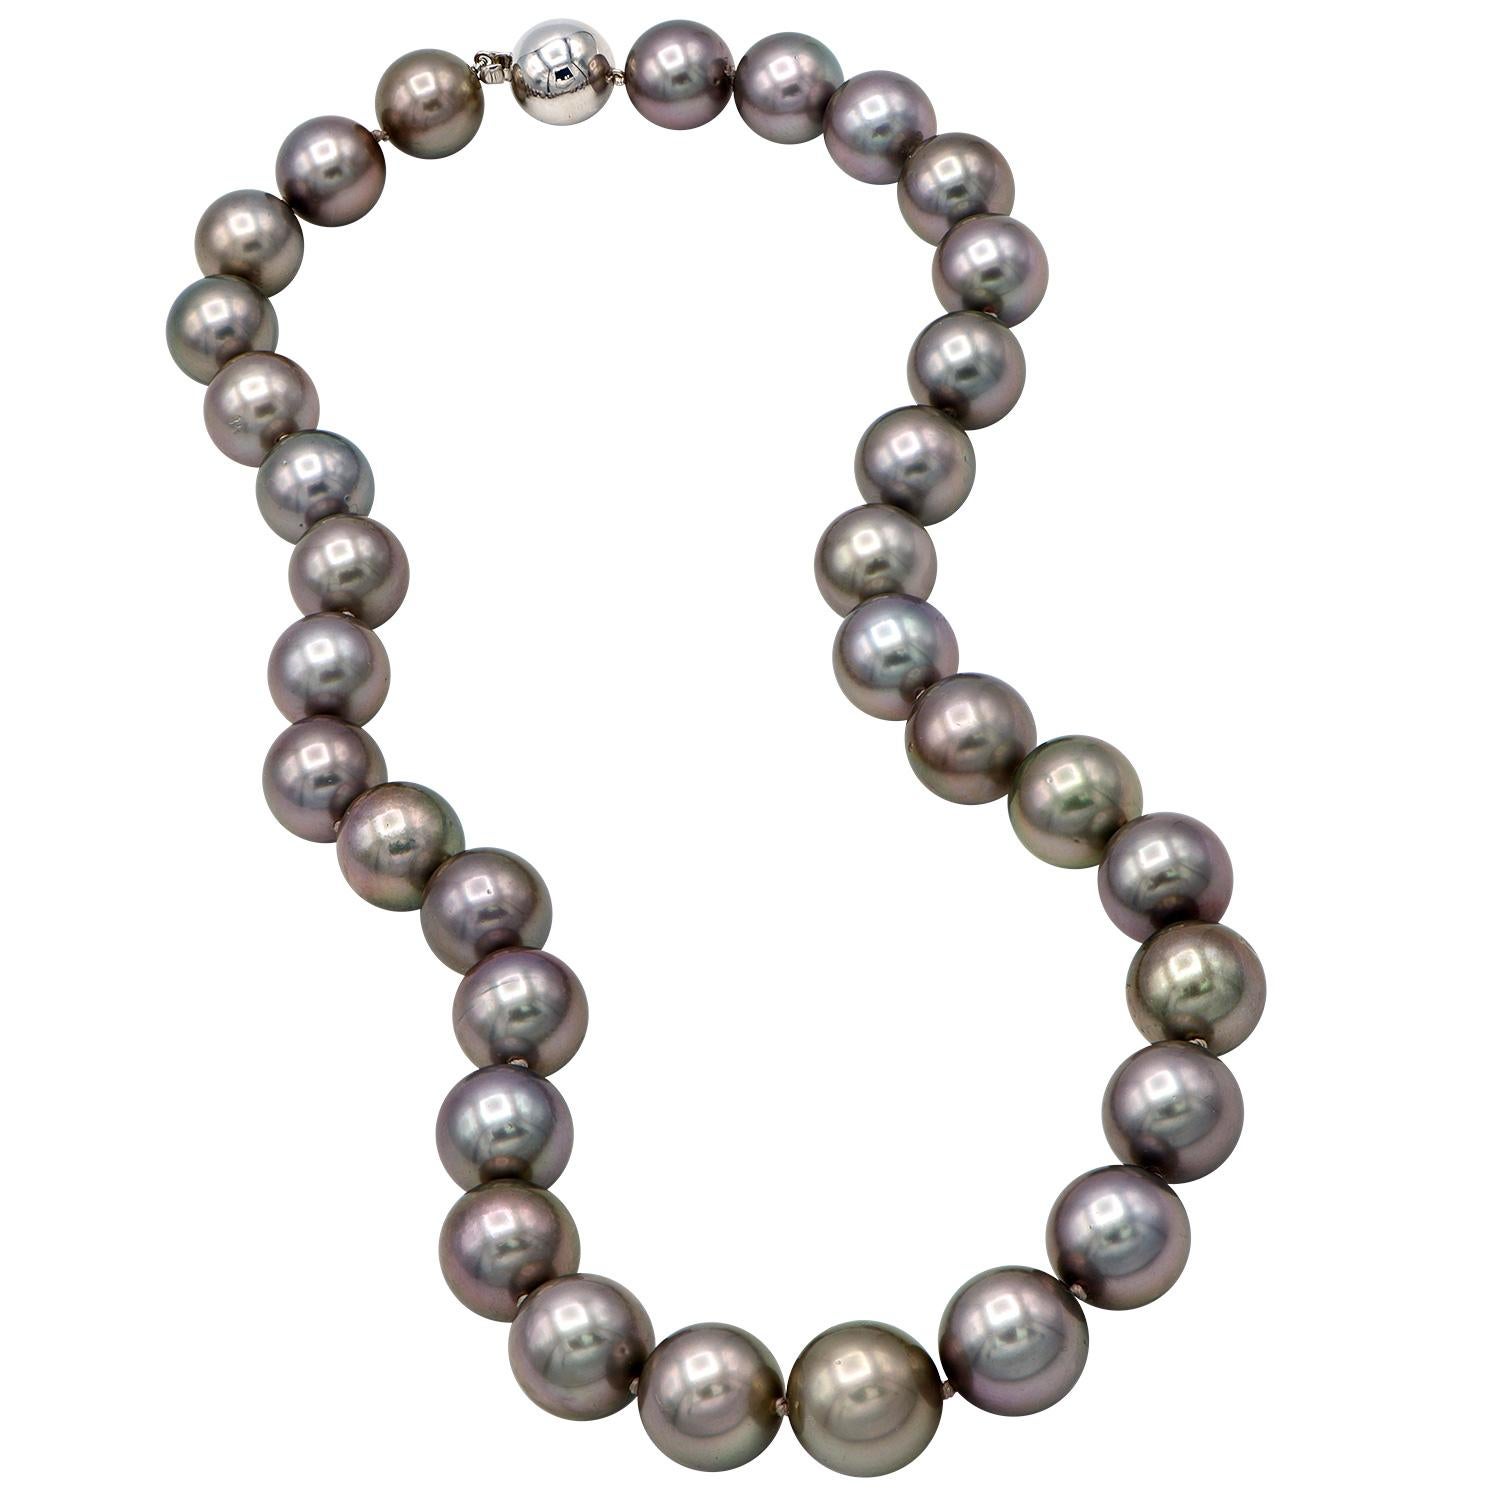 This beautiful black Tahitian pearl necklace is stunning with pink undertones. These 12-14.2mm pearls make an 18 inch strand made out of 33 pearls. The pearls are expertly strung with a double knot between each pearl and finished with a 14 karat